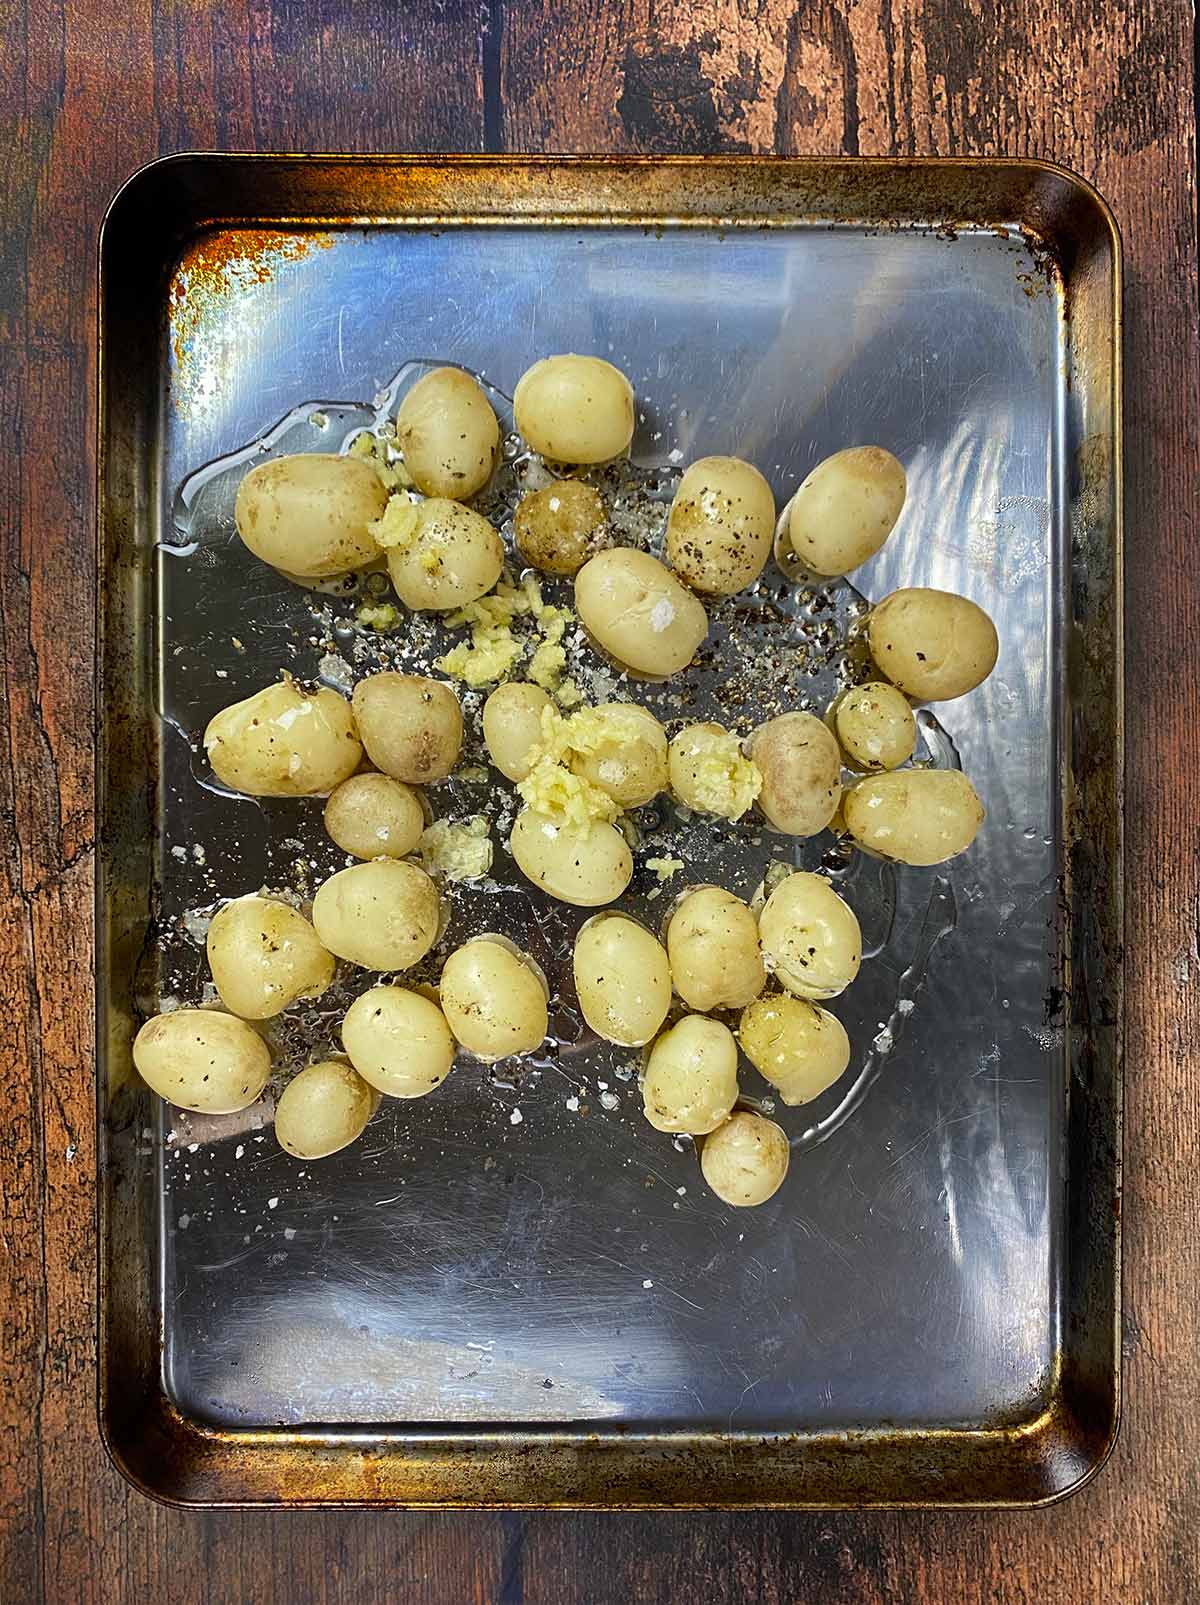 Oil and crushed garlic added to the potatoes.